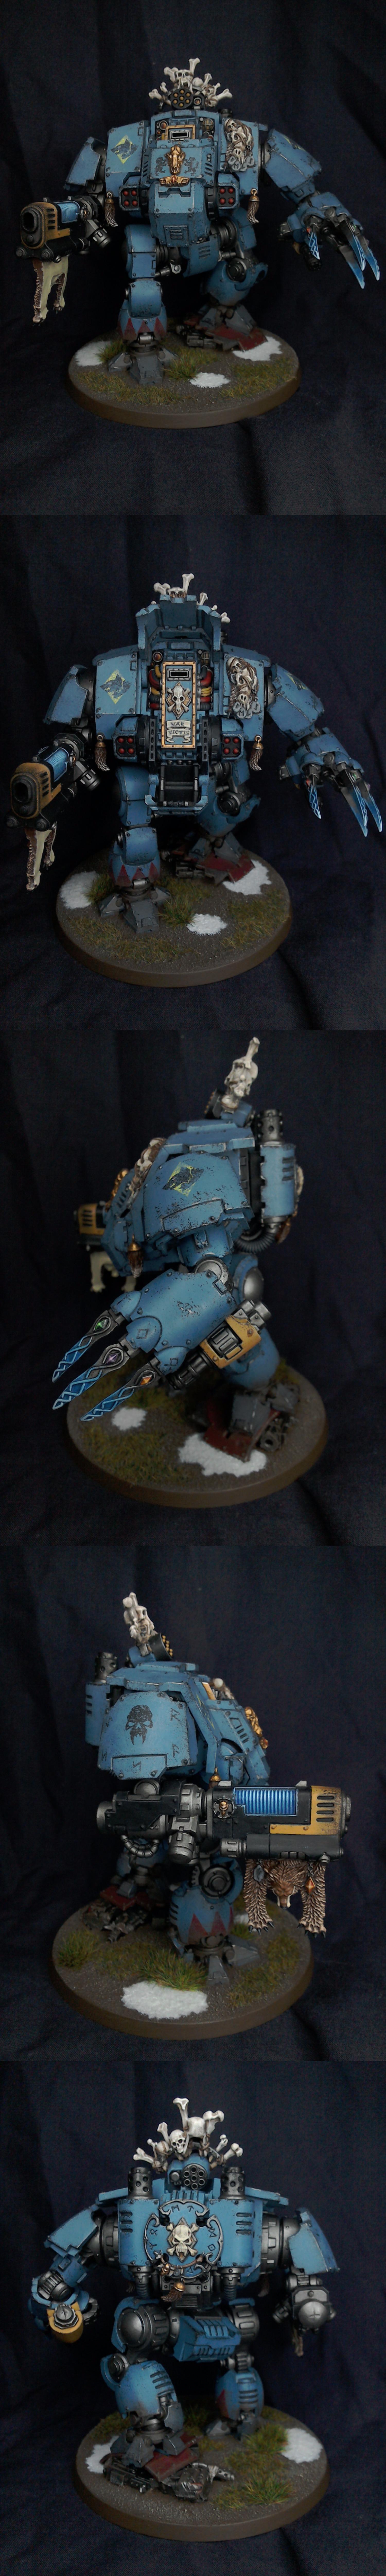 Dreadnought, Primaris, Redemptor, Redemptor Dreadnought, Space Marines, Space Wolves, Warhammer 40,000